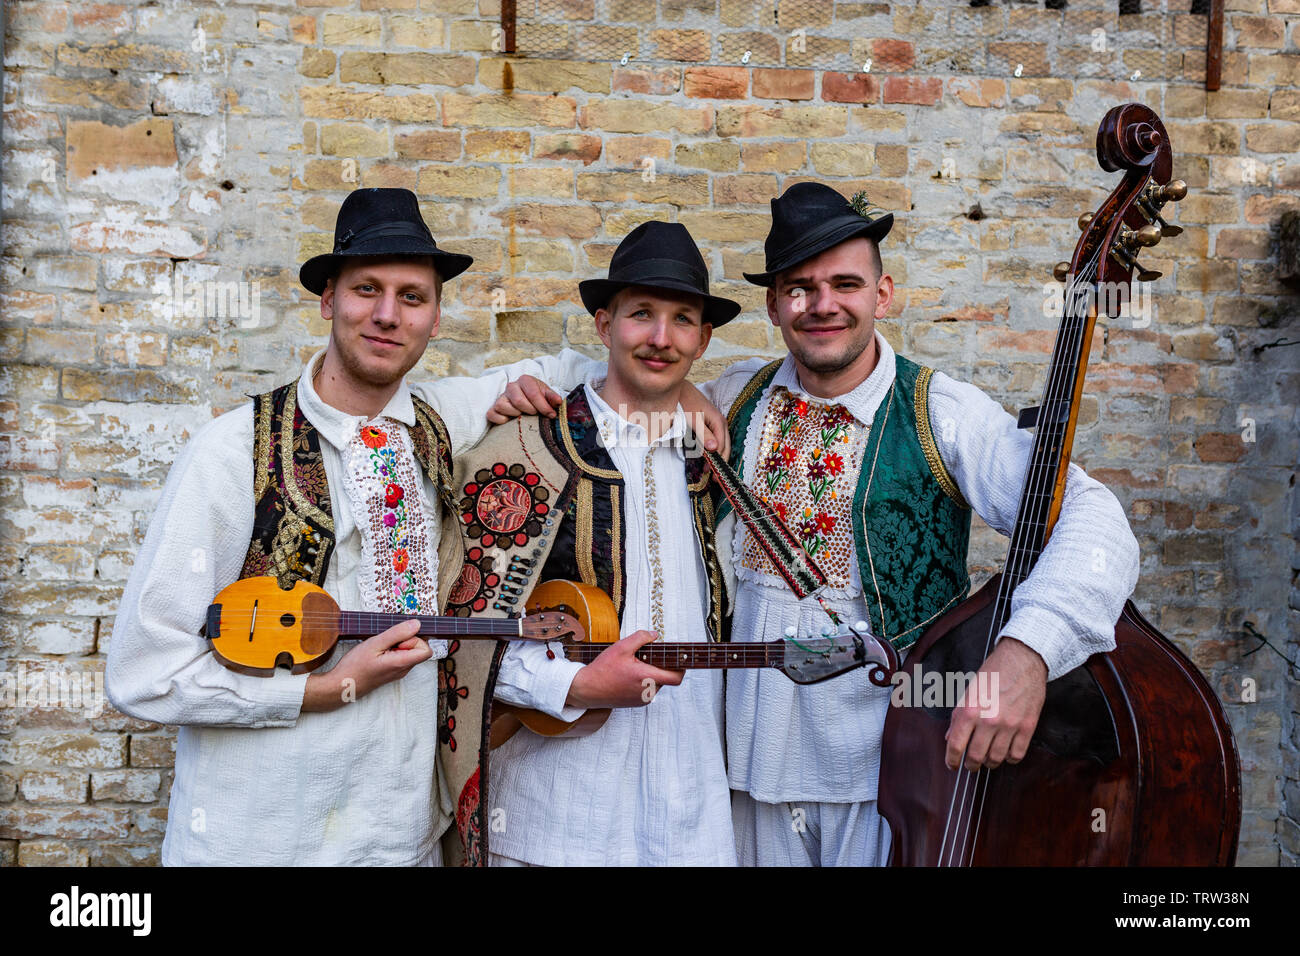 Traditional, UNESCO-protected 'Buso' heritage of Mohacs, Hungary Stock Photo